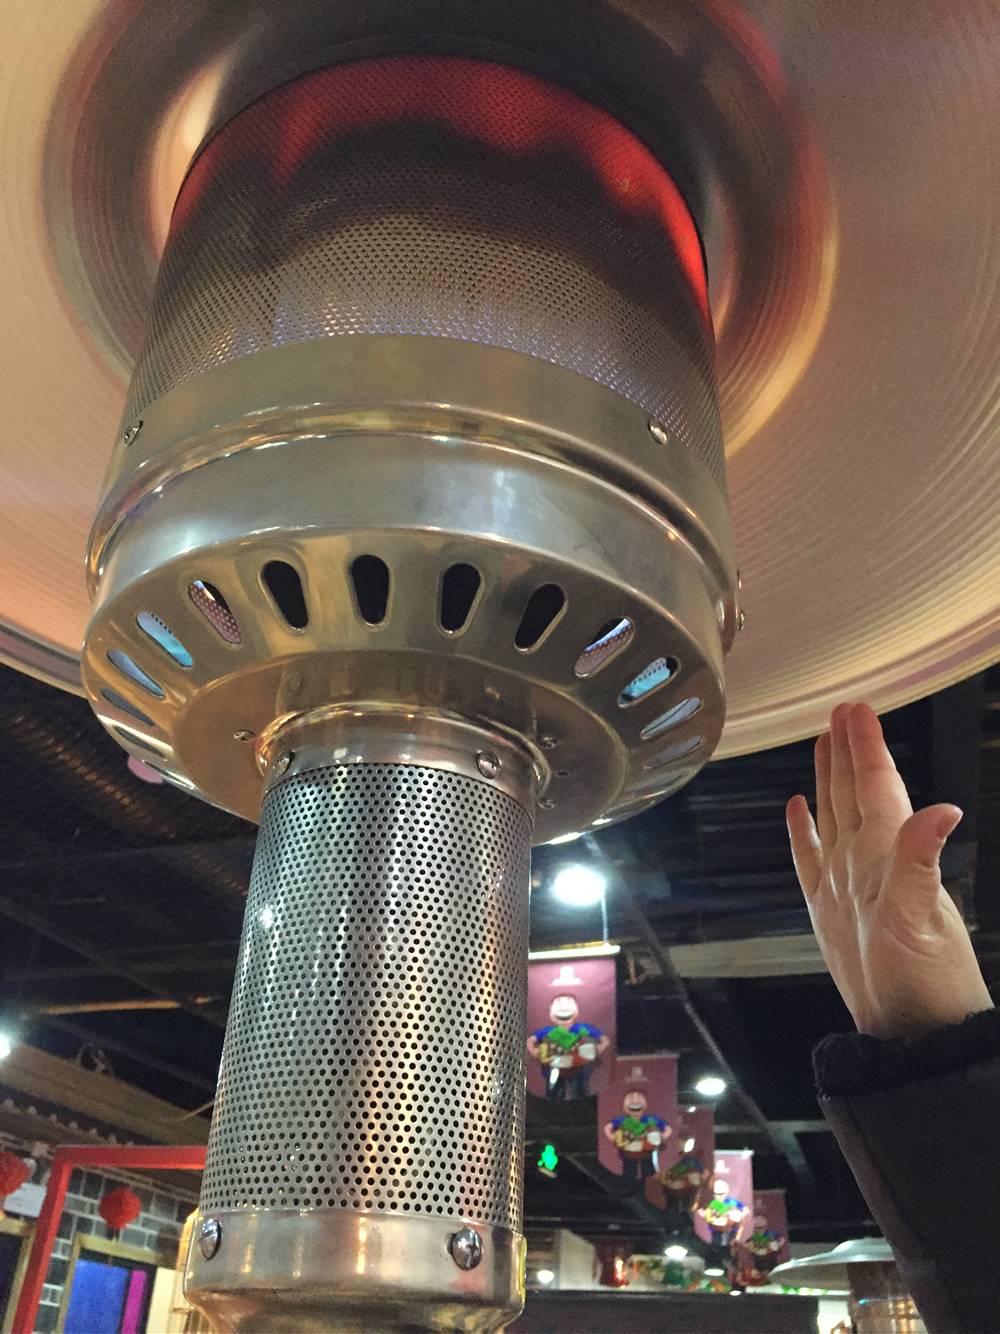 A hand is warmed by a round hole perforated stove with flames in a theme restaurant.